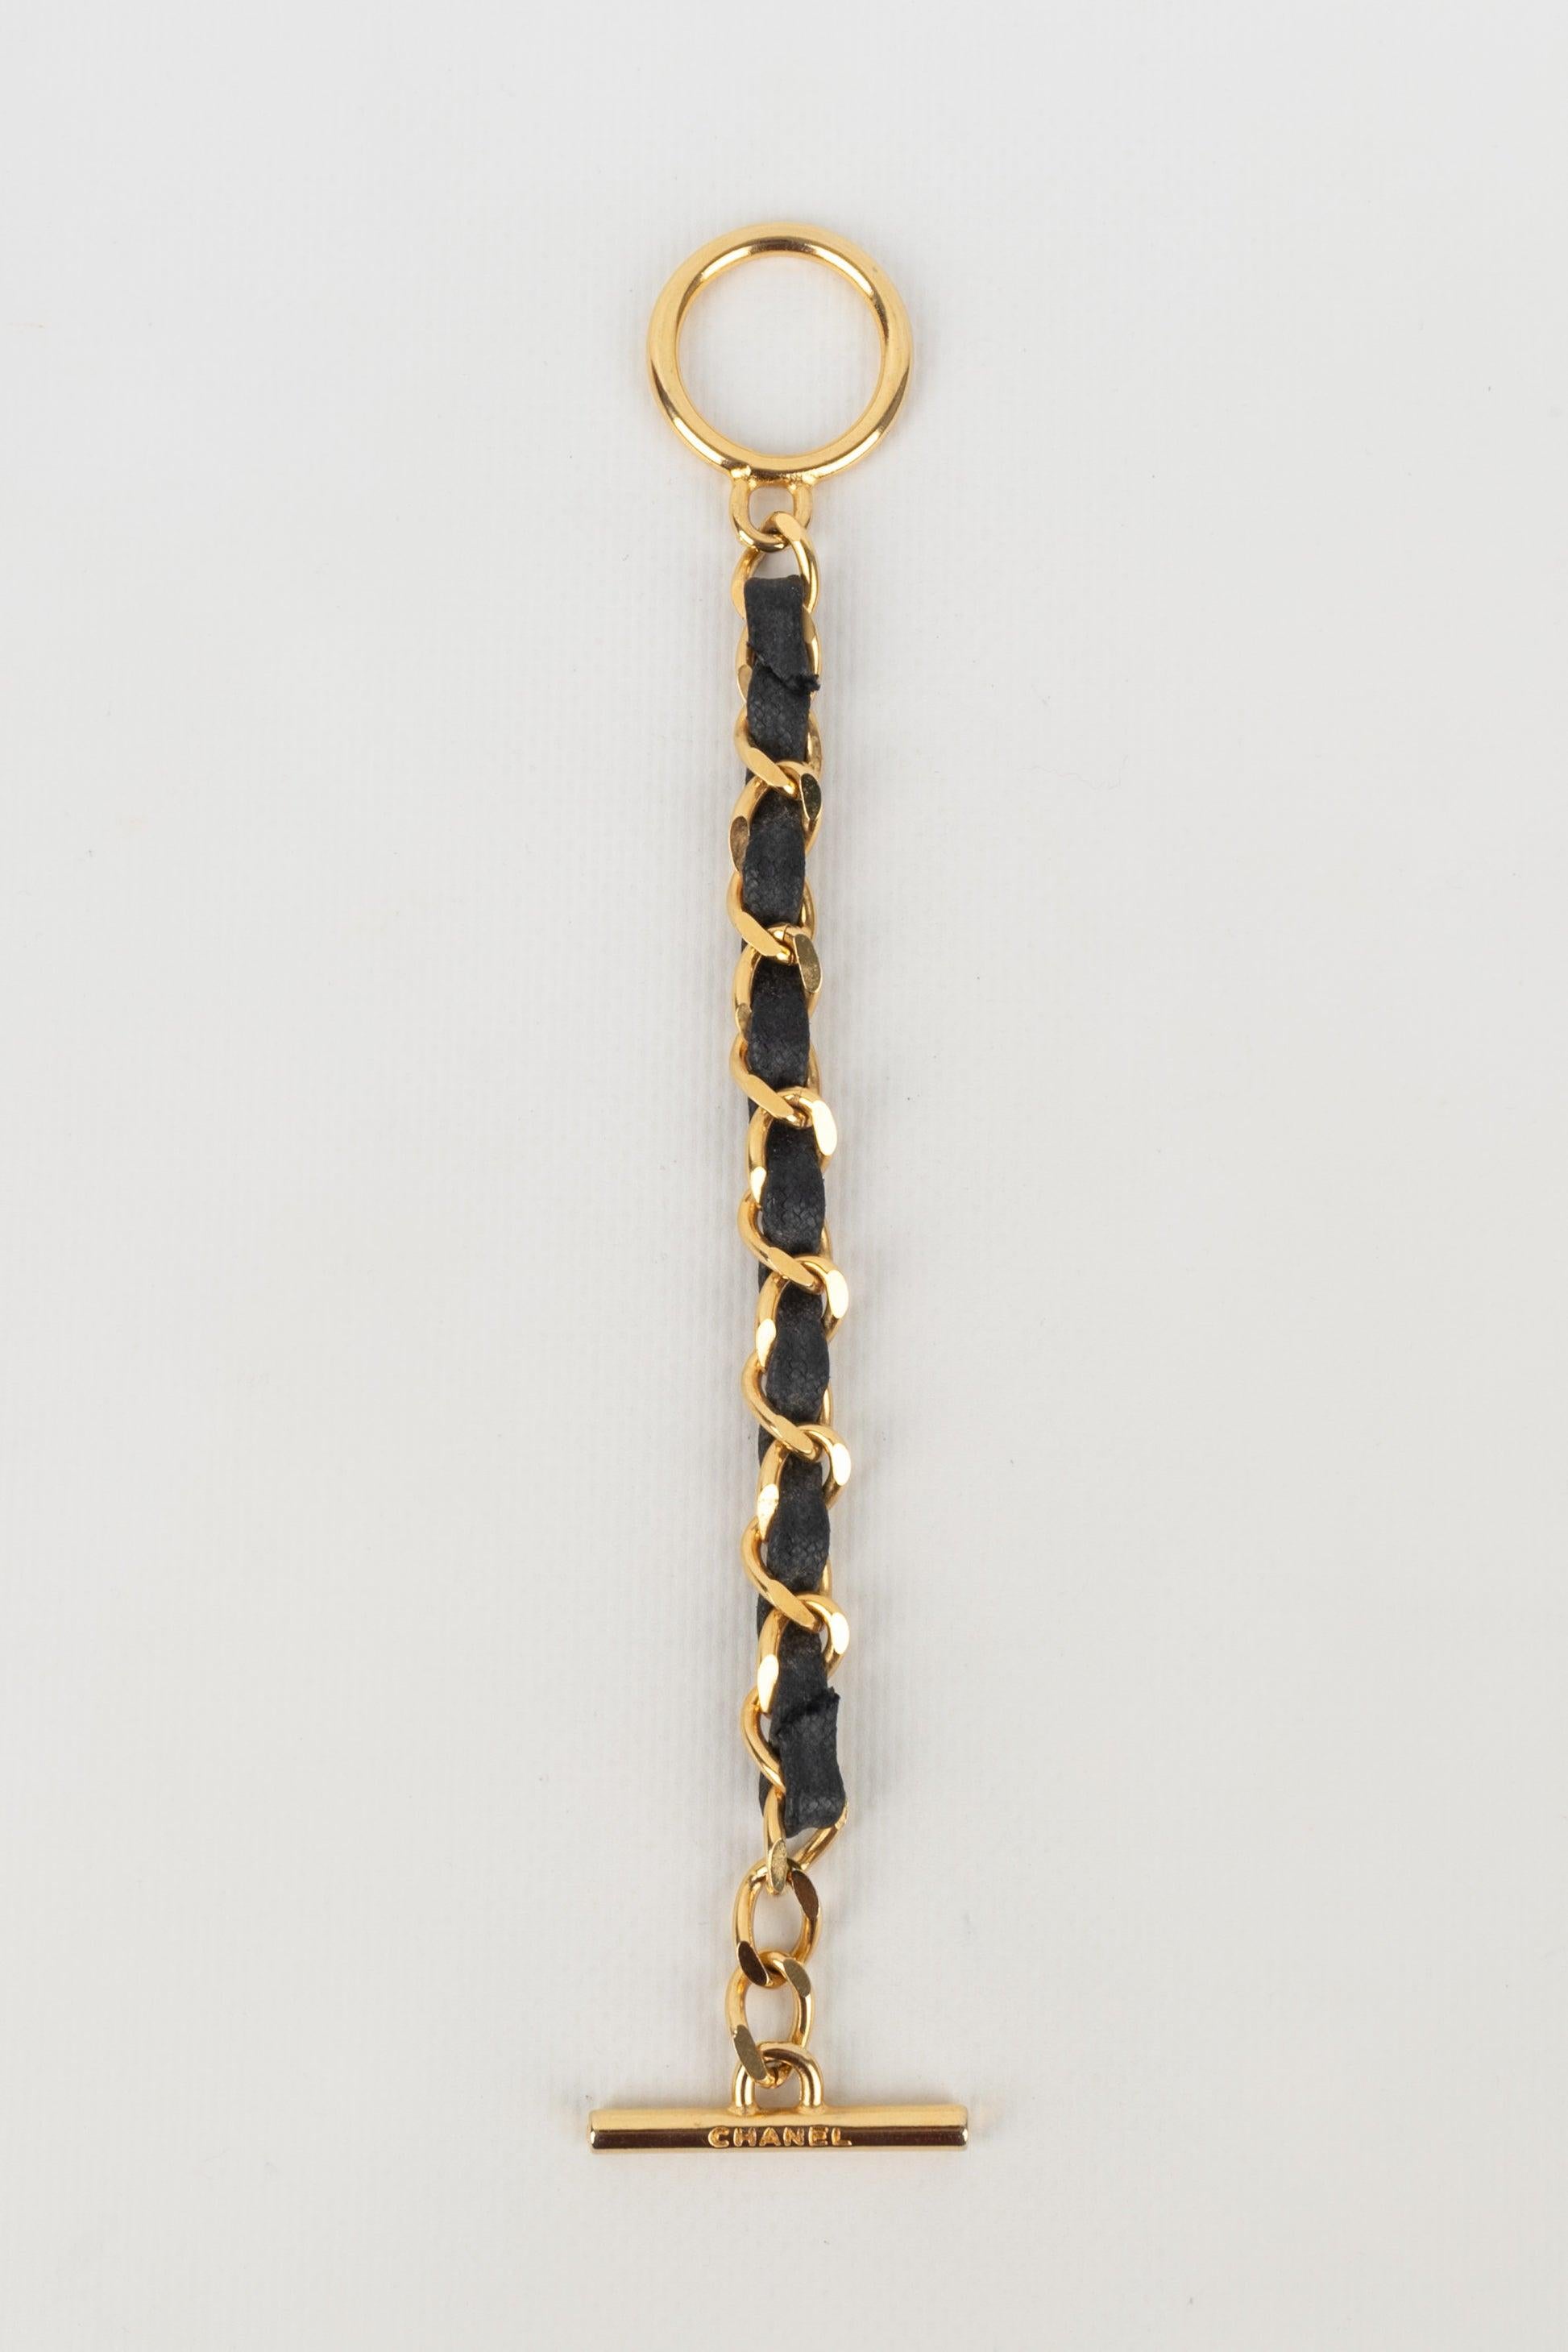 Chanel - Golden metal bracelet interlaced with black leather. Jewelry from the 1980s.

Additional information:
Condition: Good condition
Dimensions: Length: 18 cm
Period: 20th Century

Seller Reference: BRAB123